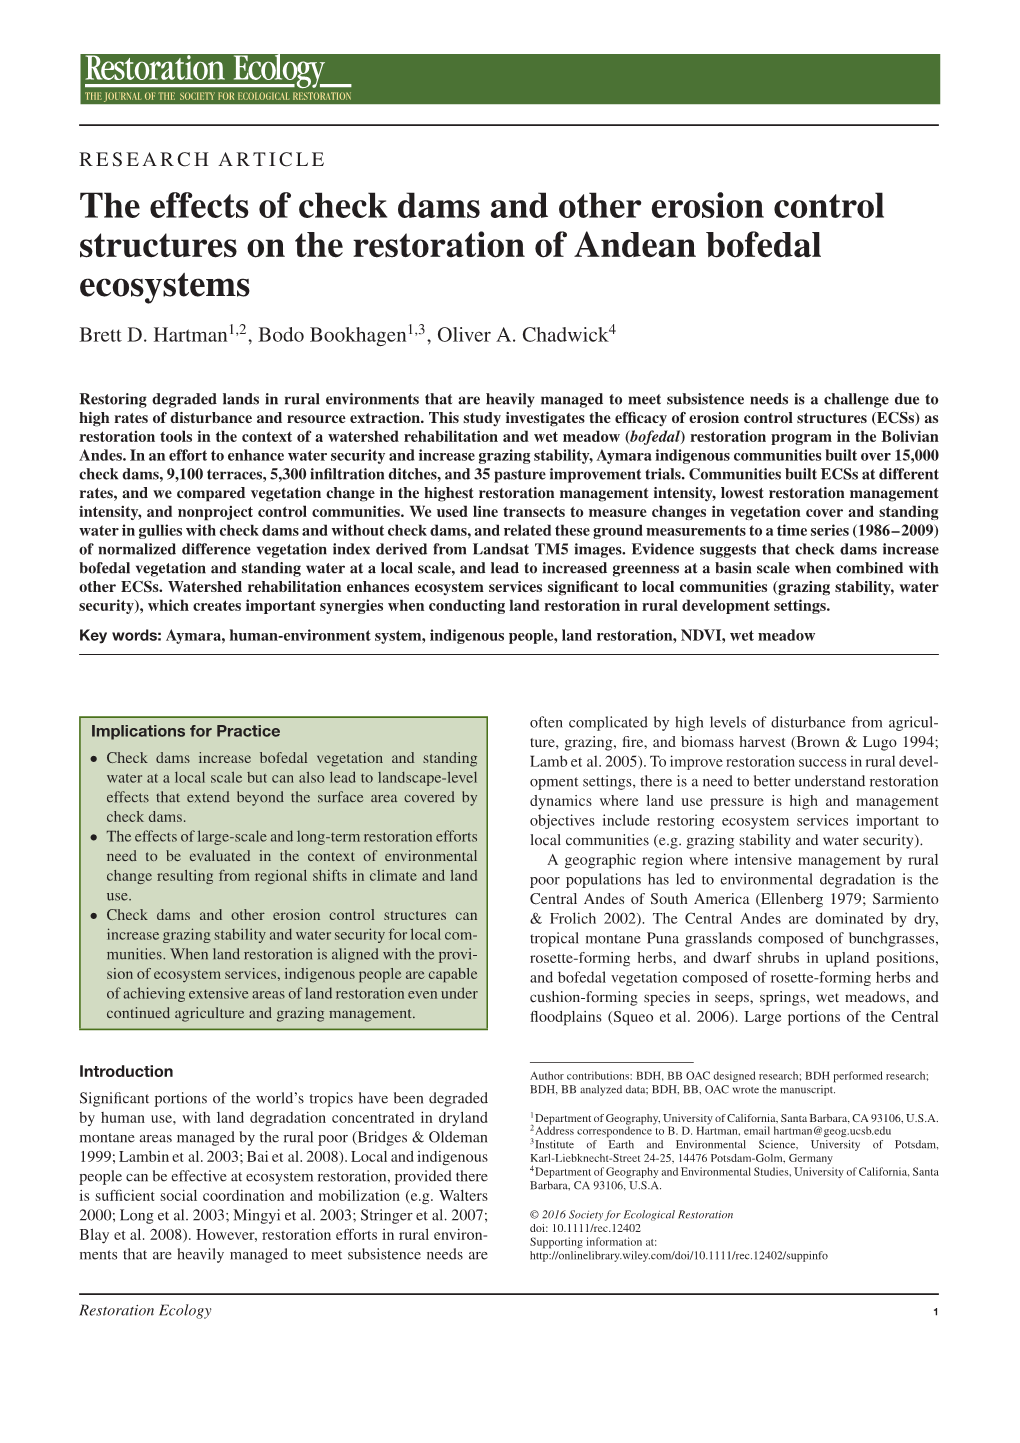 The Effects of Check Dams and Other Erosion Control Structures on the Restoration of Andean Bofedal Ecosystems Brett D